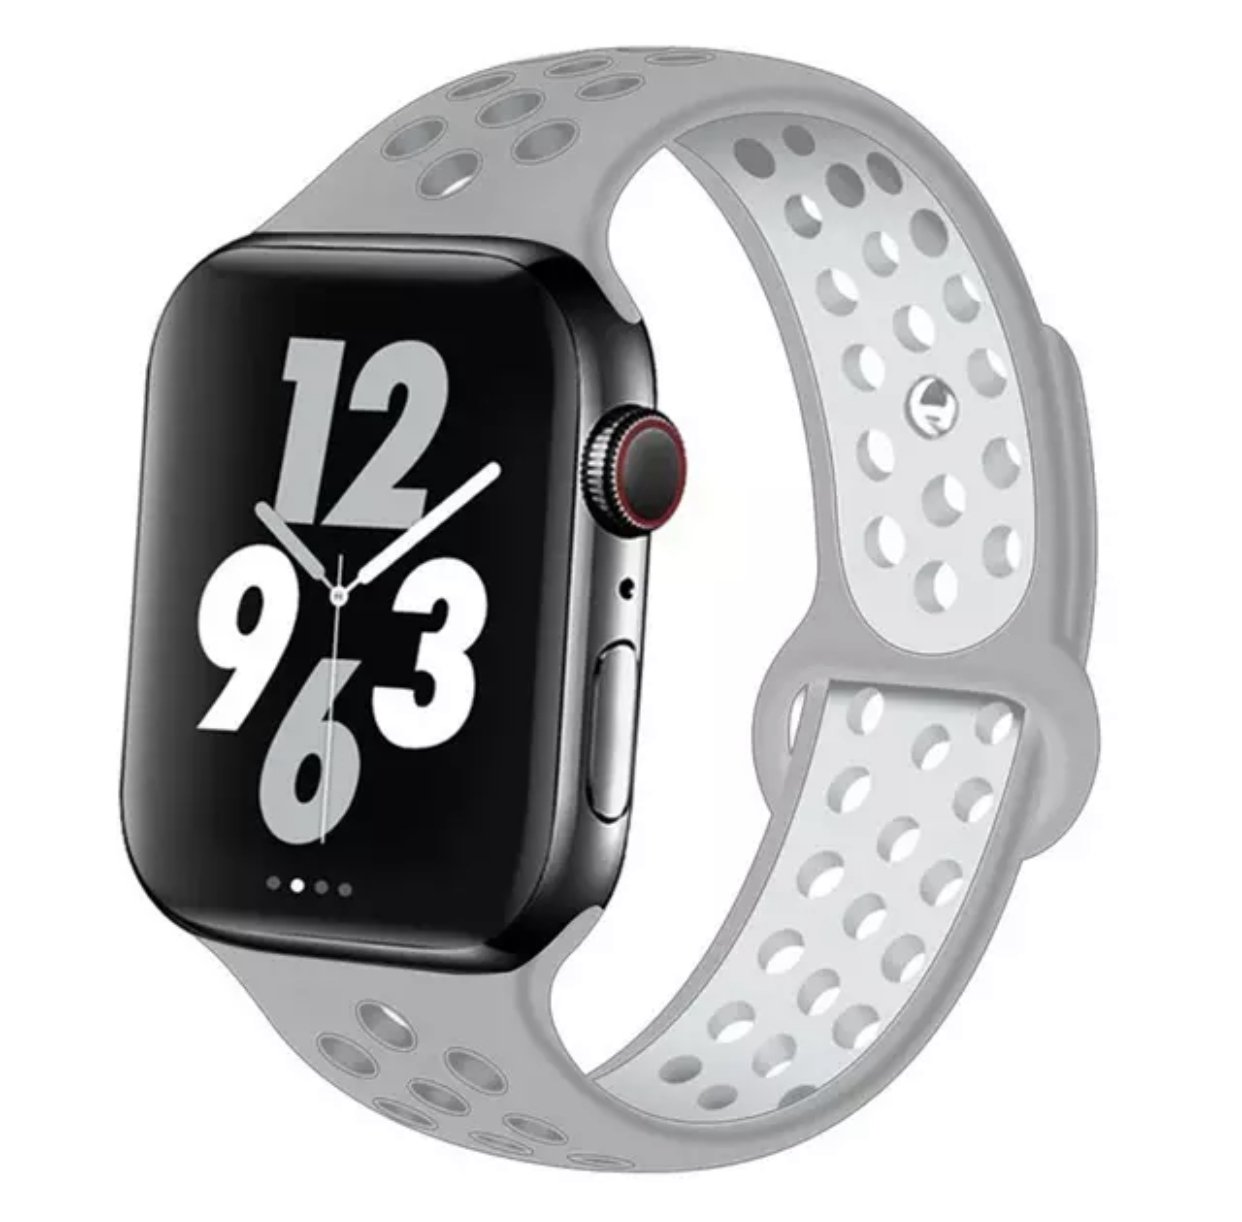 Silicone sport band For Apple Watch 1,2,3,4,5